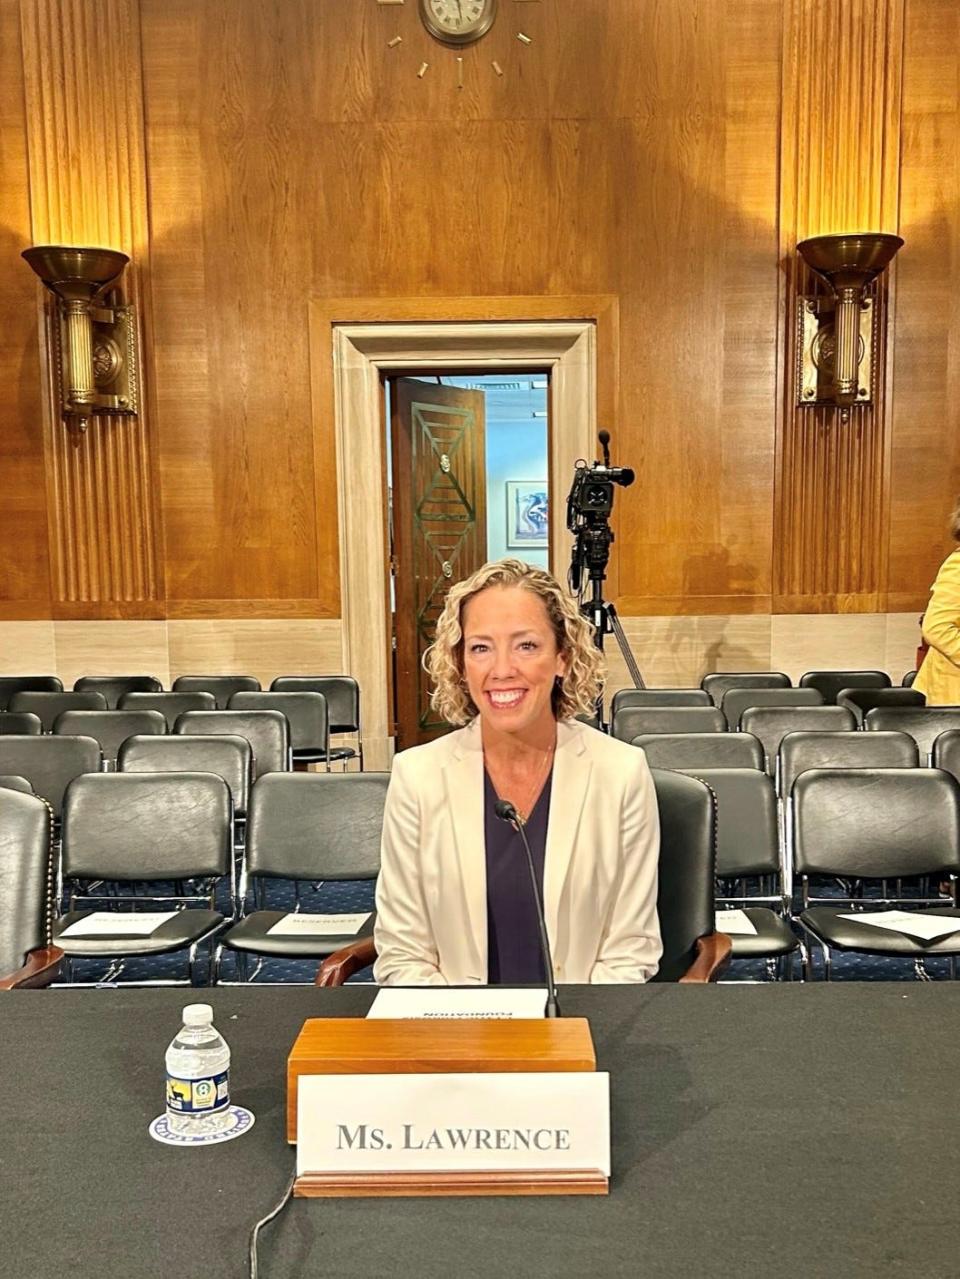 Cystic fibrosis patient Melanie Lawrence, who testified before Congress recently in support of the PASTEUR Act, is resistant to nearly every antibiotic and has to hope her immune system can fight infection without much help from modern medicine.